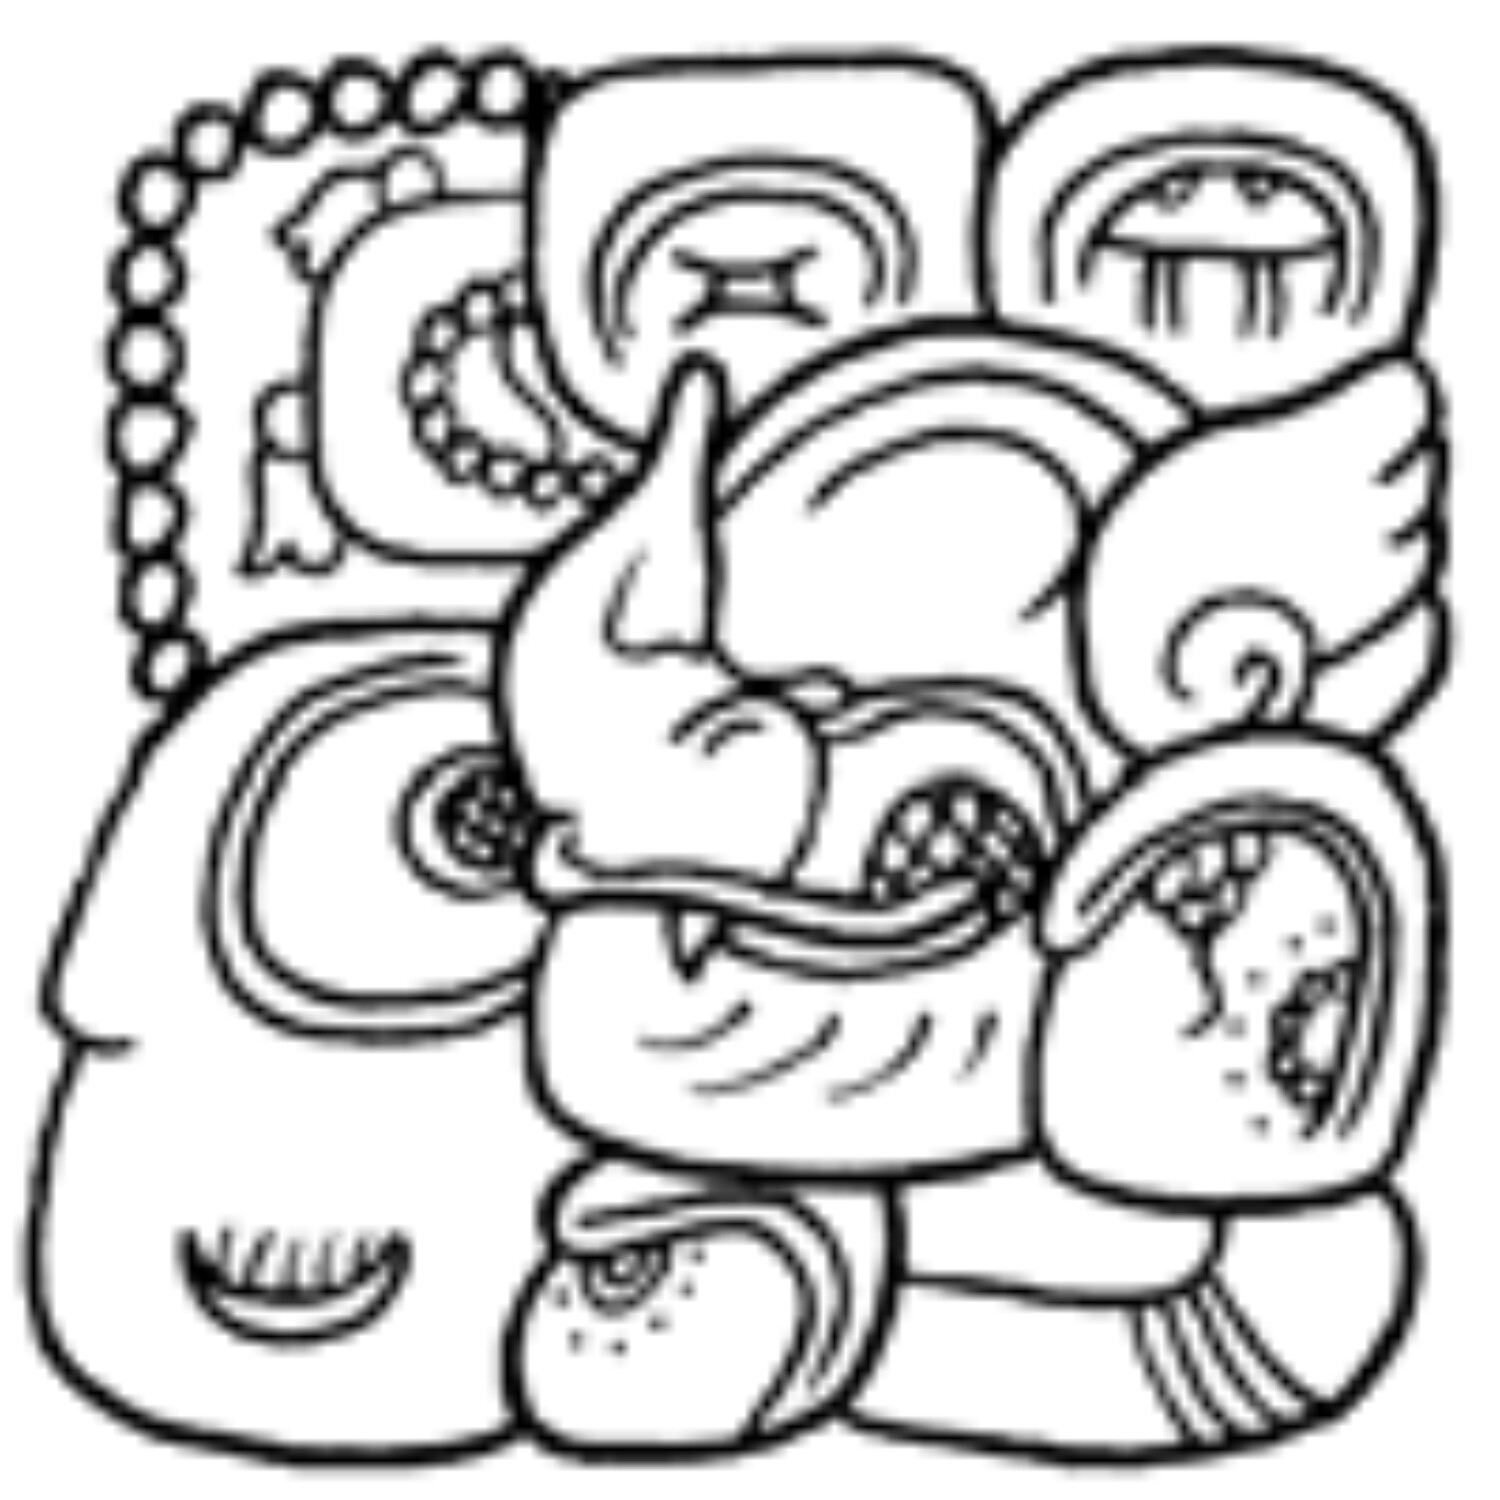 How To Read A Maya Glyph